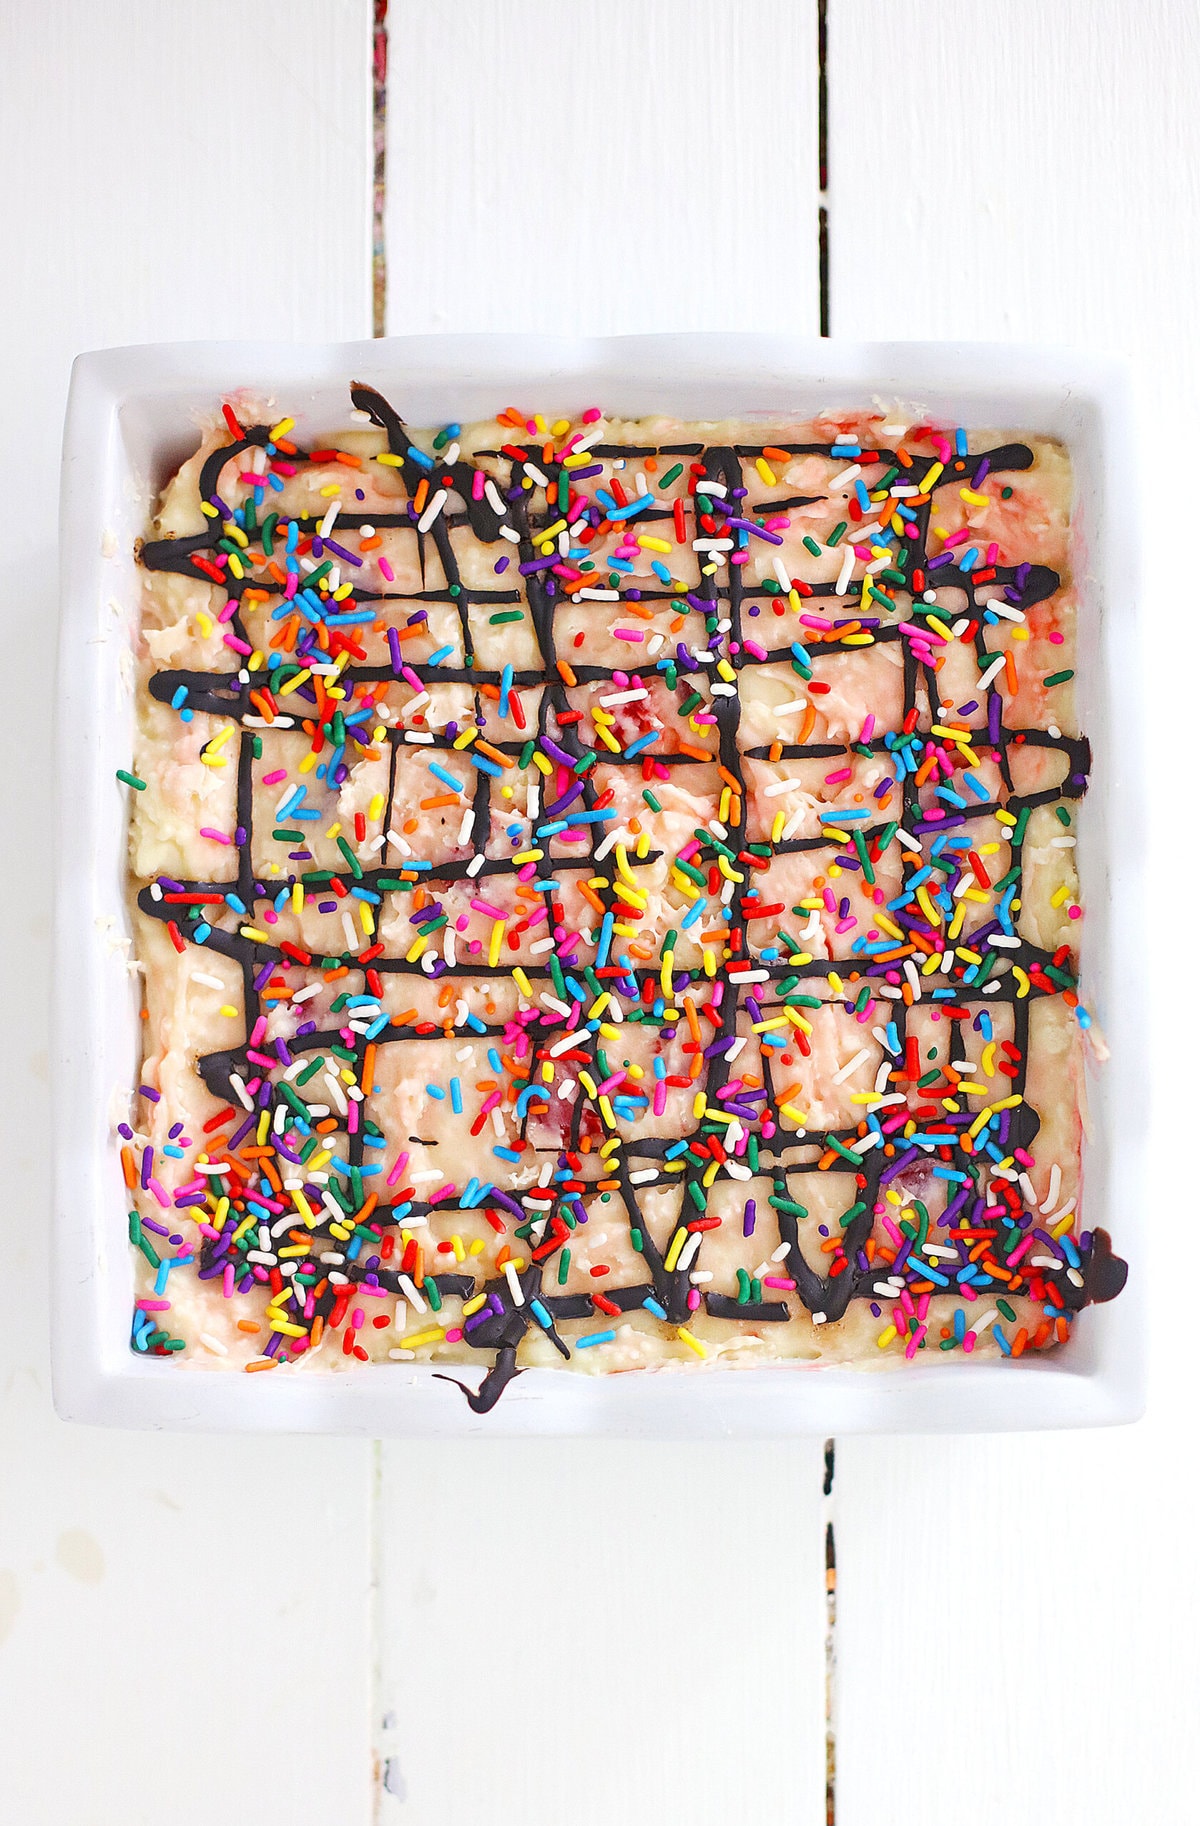 Banana fudge in a baking dish topped with sprinkles and hot fudge